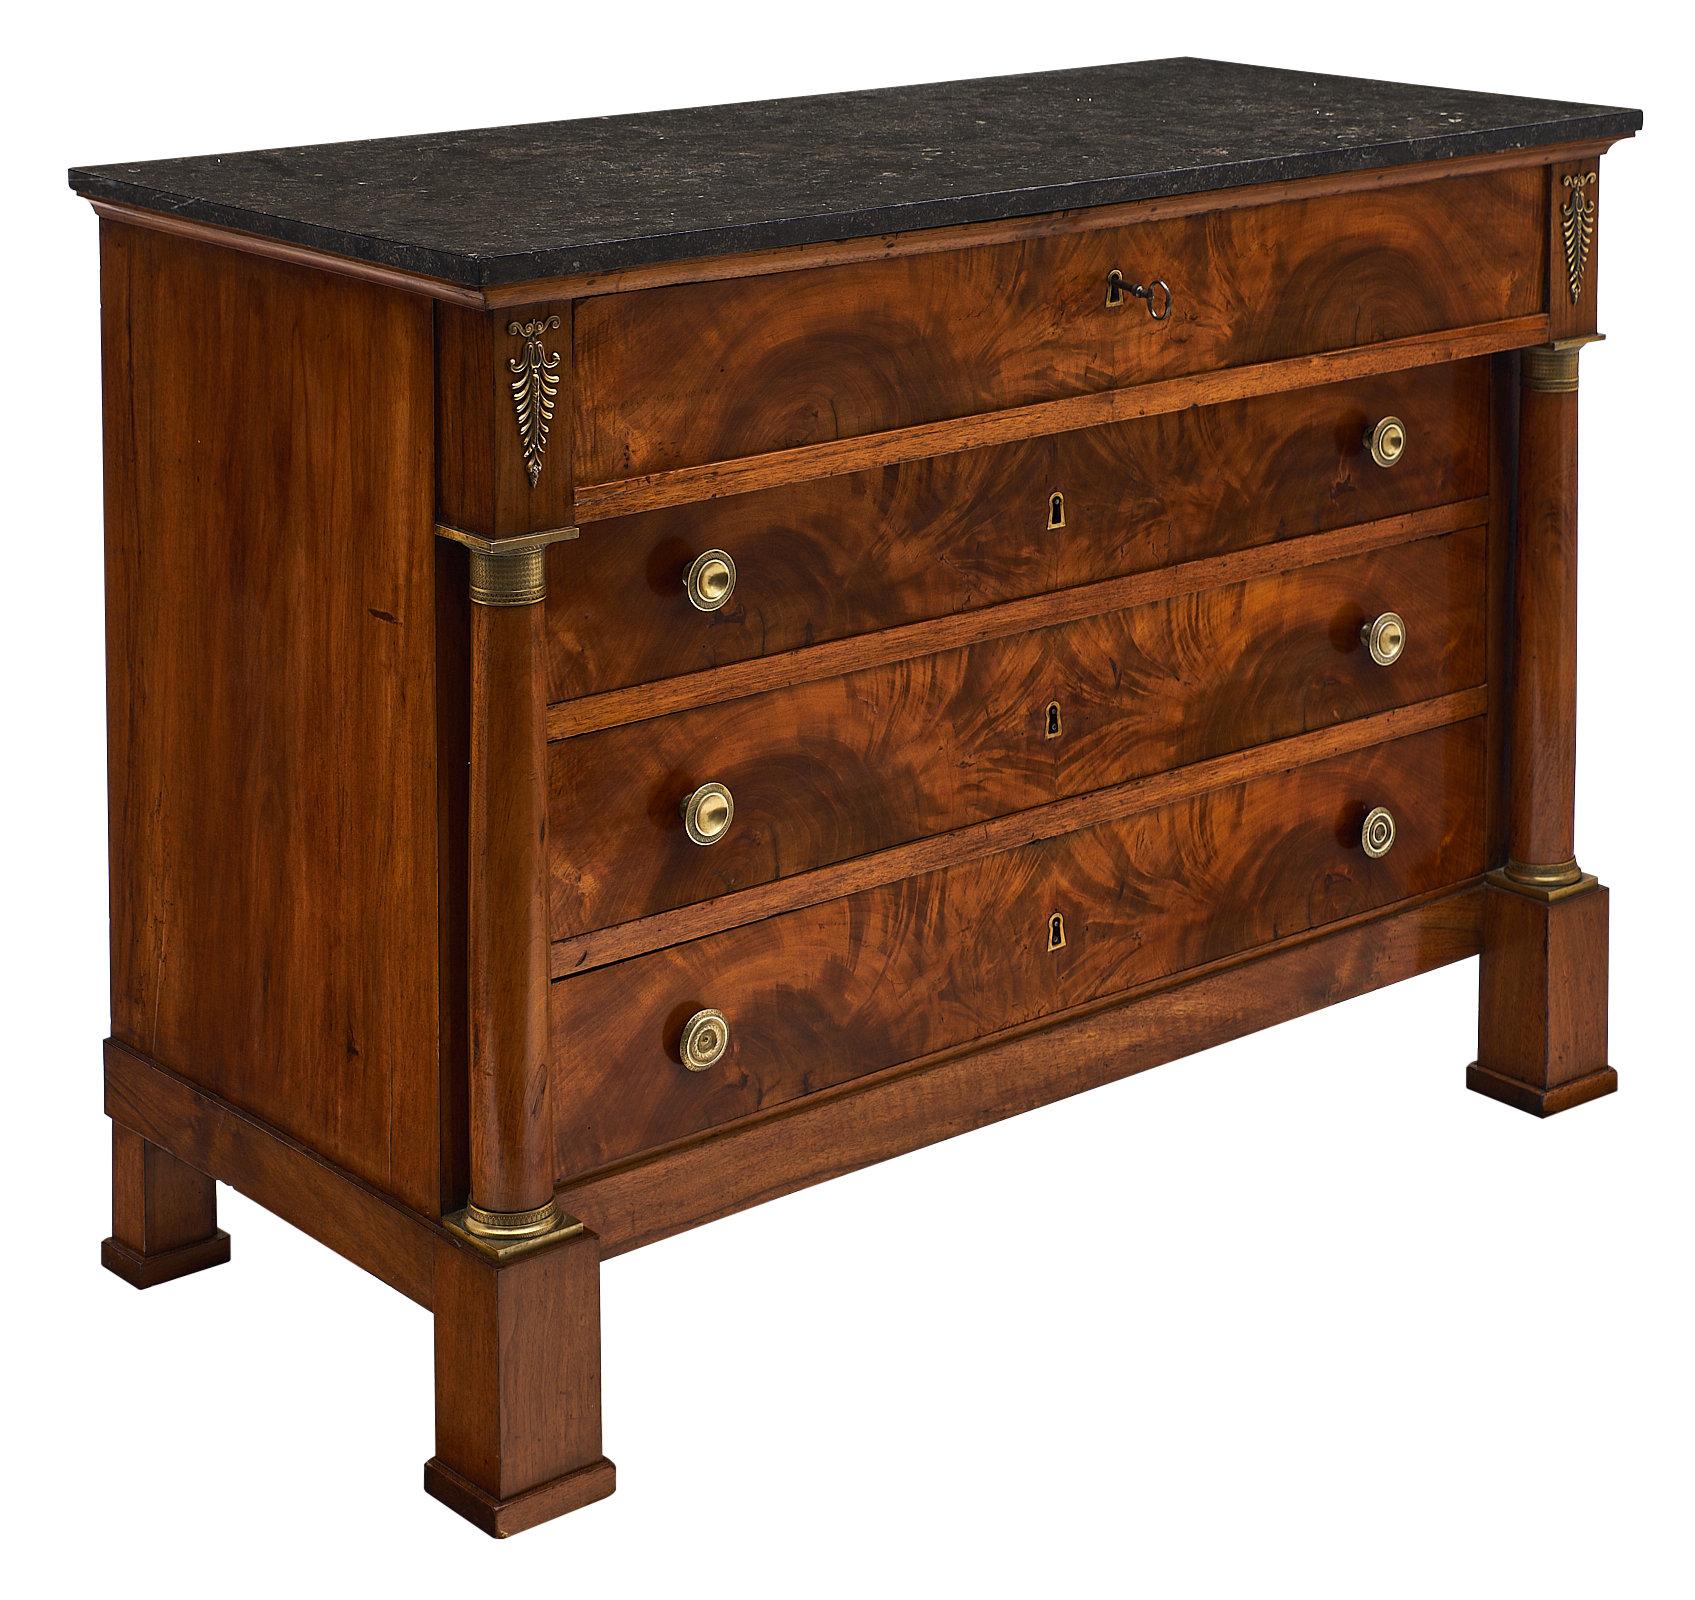 French Empire period chest with grey marble top. It is made of solid walnut and burled walnut in excellent antique condition. This impeccable period commode features detached columns, decorative bronzes, and the original dark grey intact marble